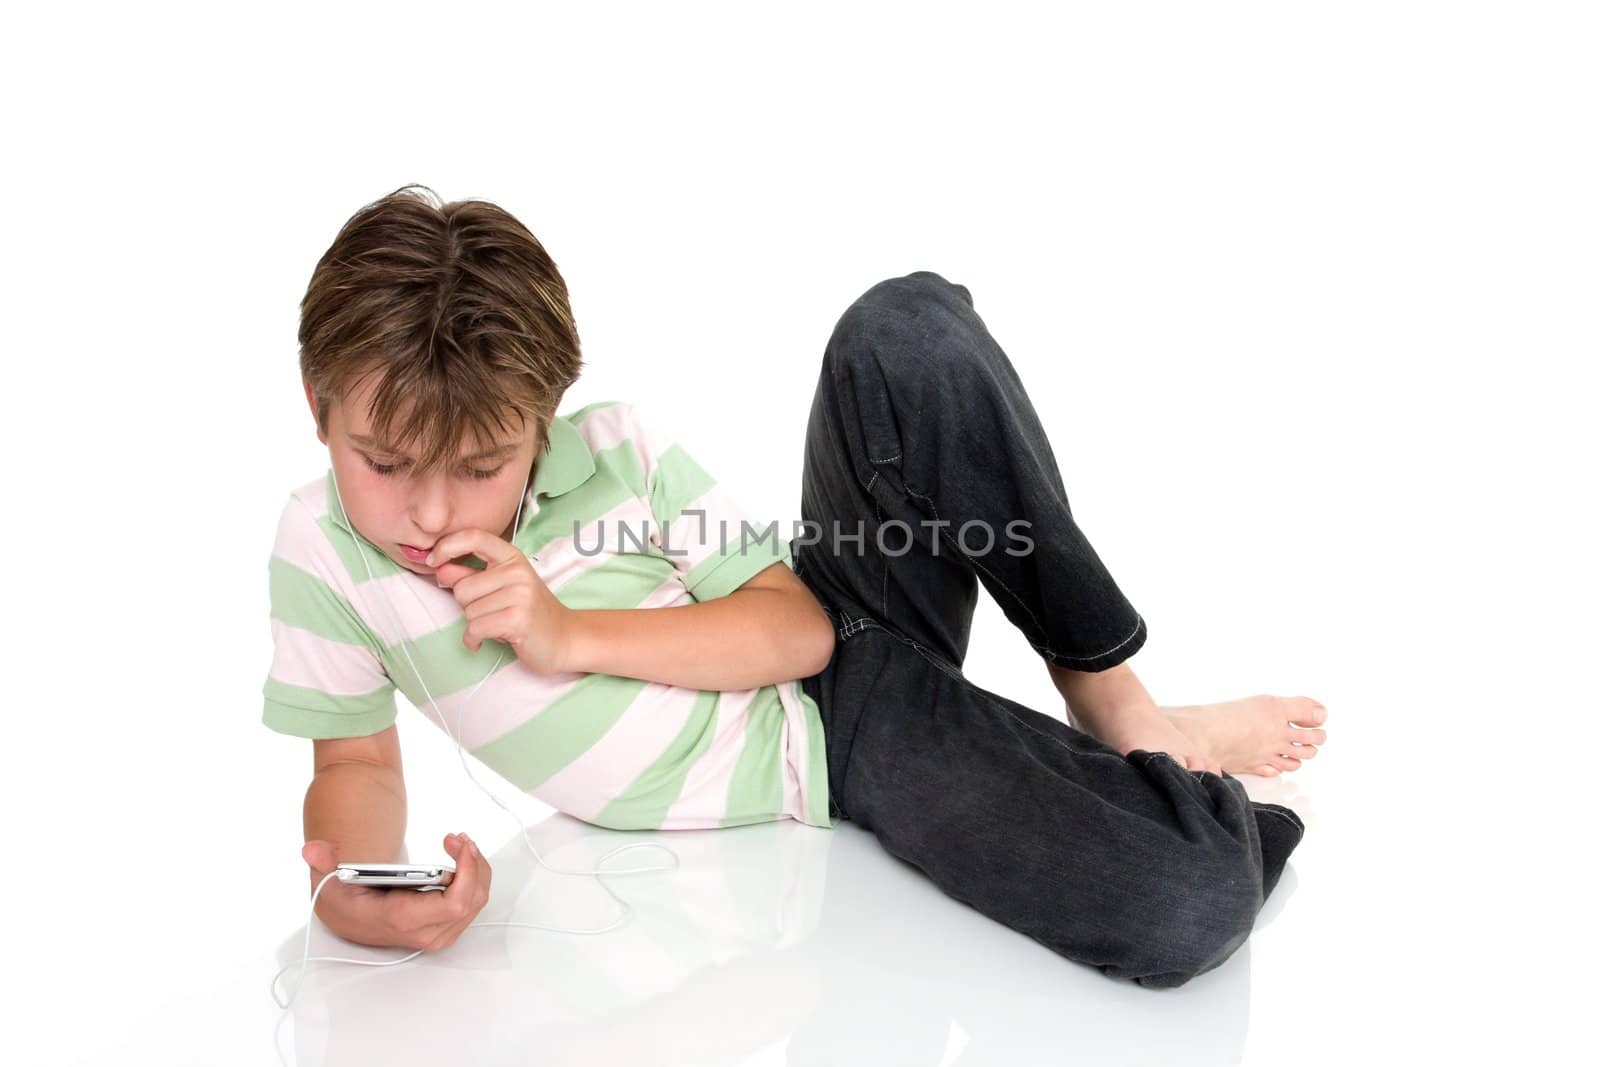 Child relaxing with electronic music player.